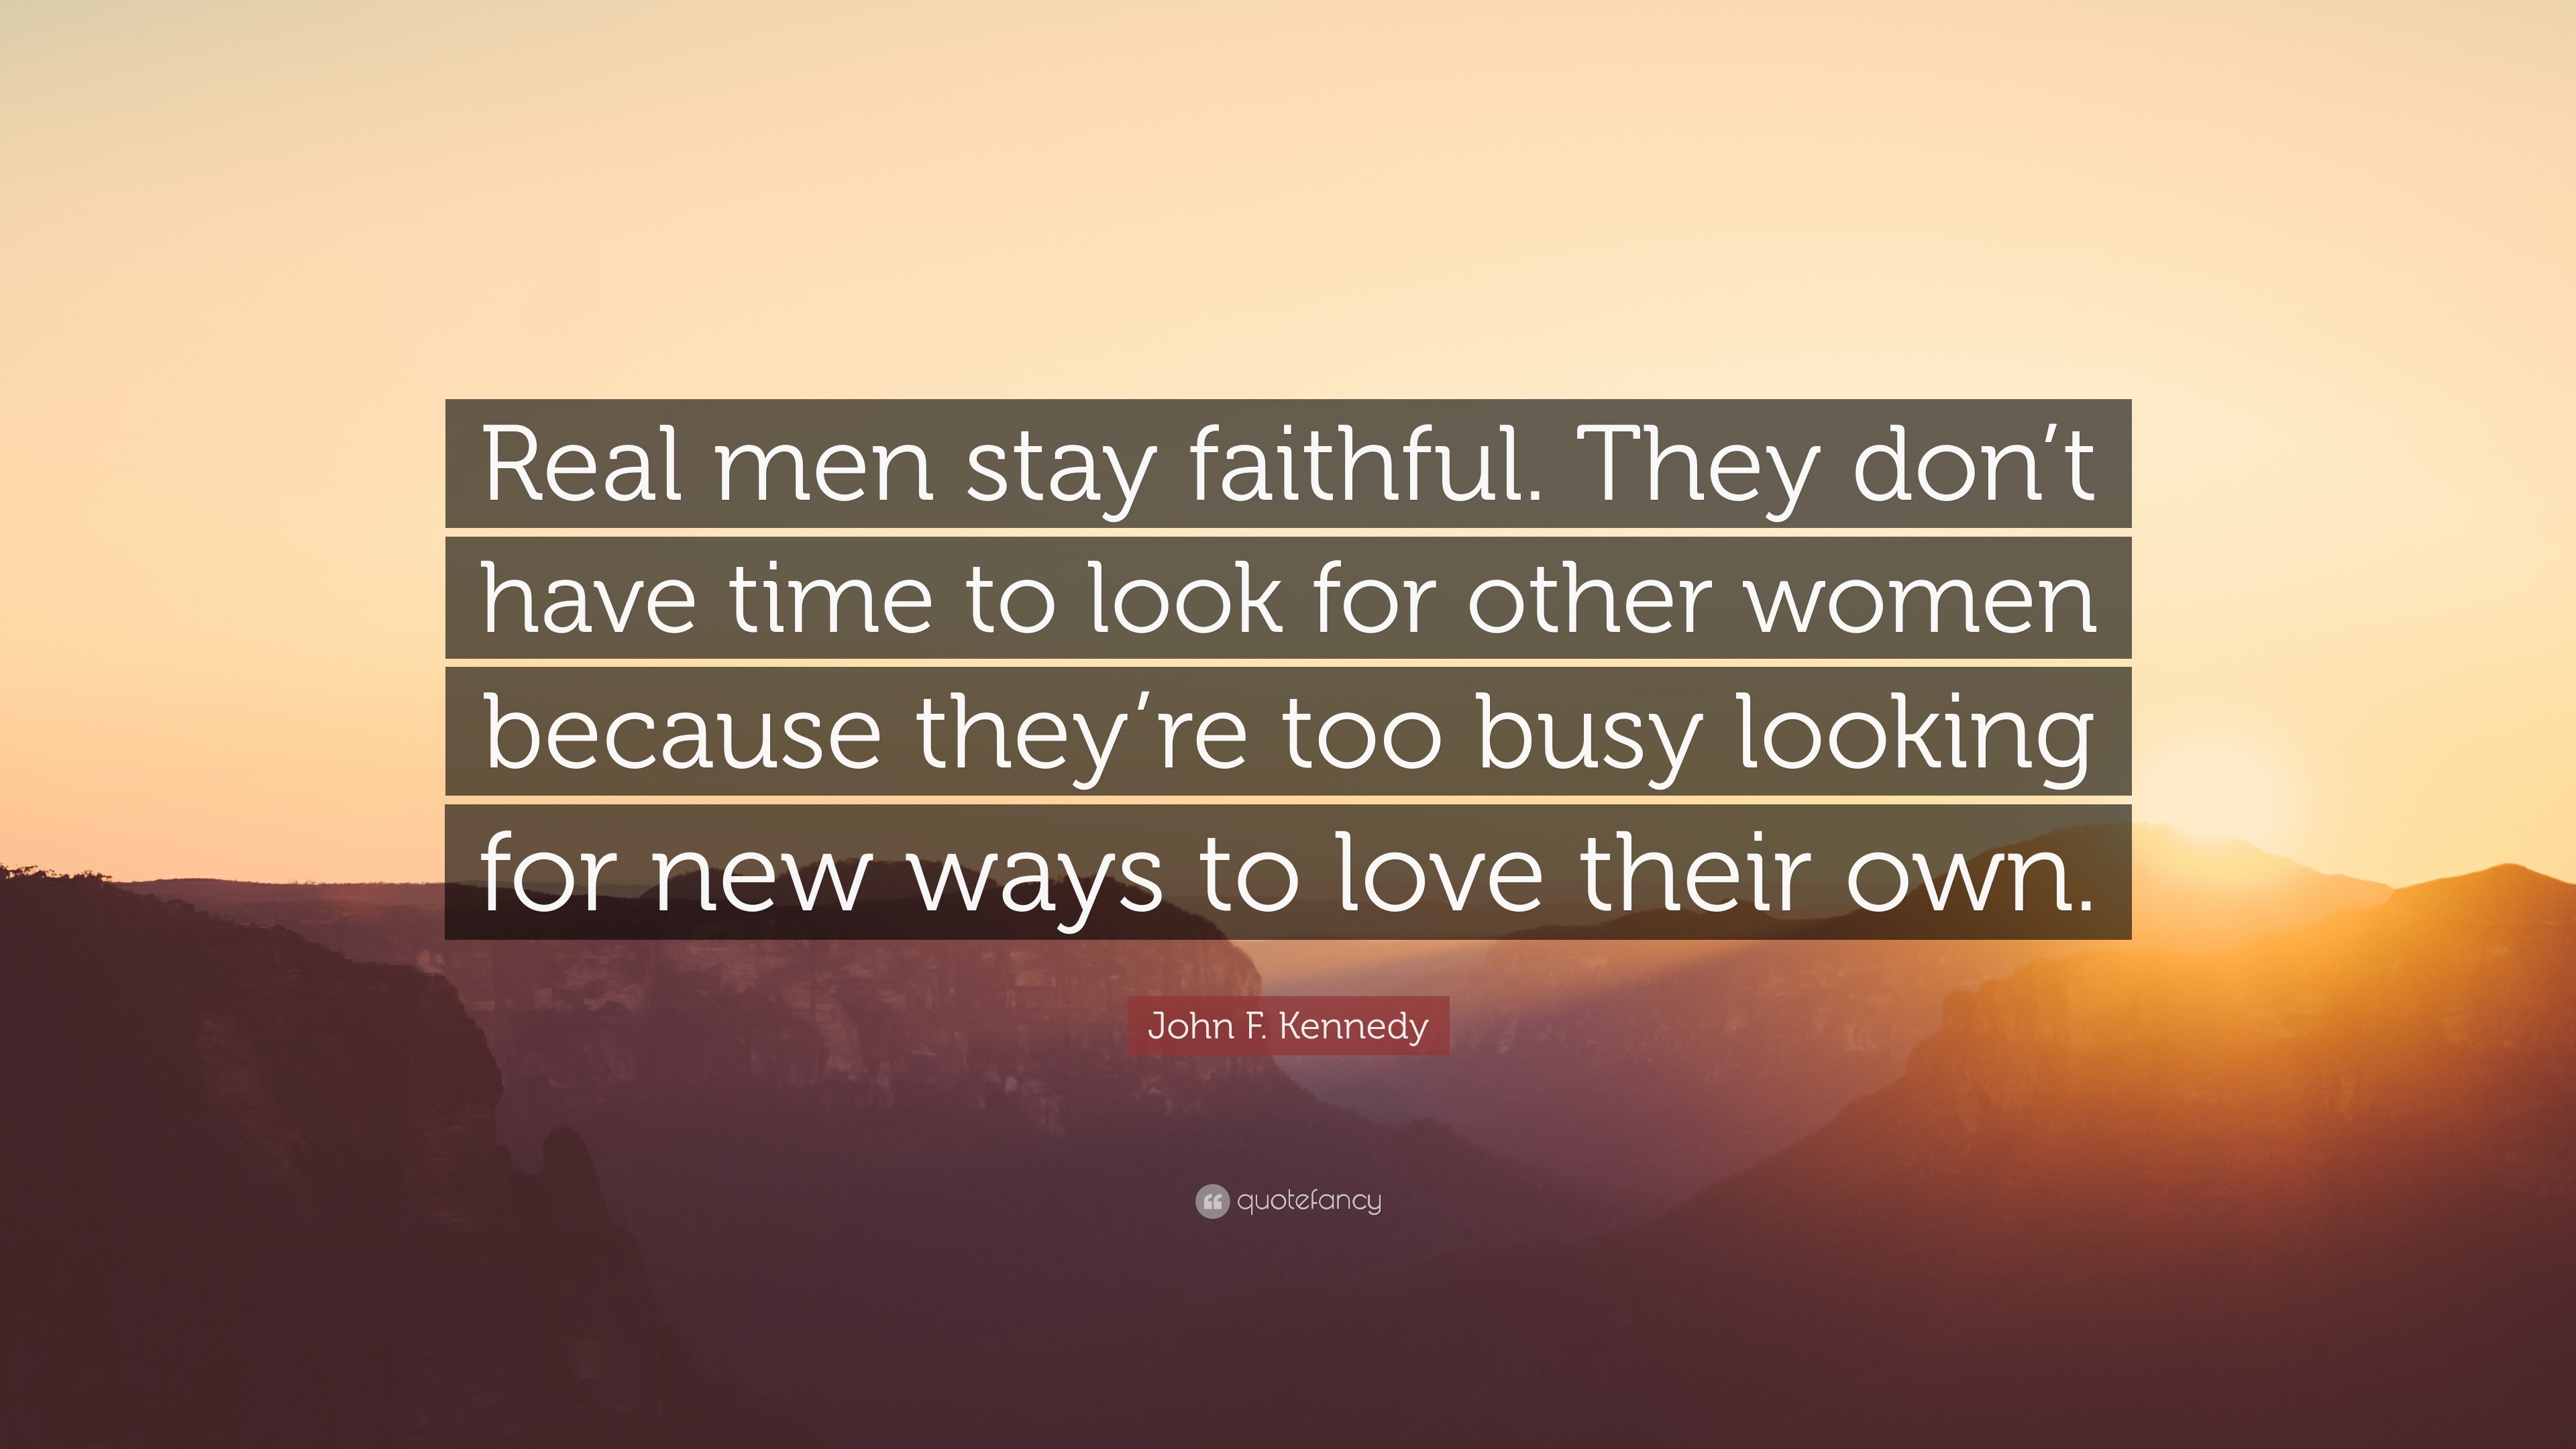 John F Kennedy Quote “Real men stay faithful They don t